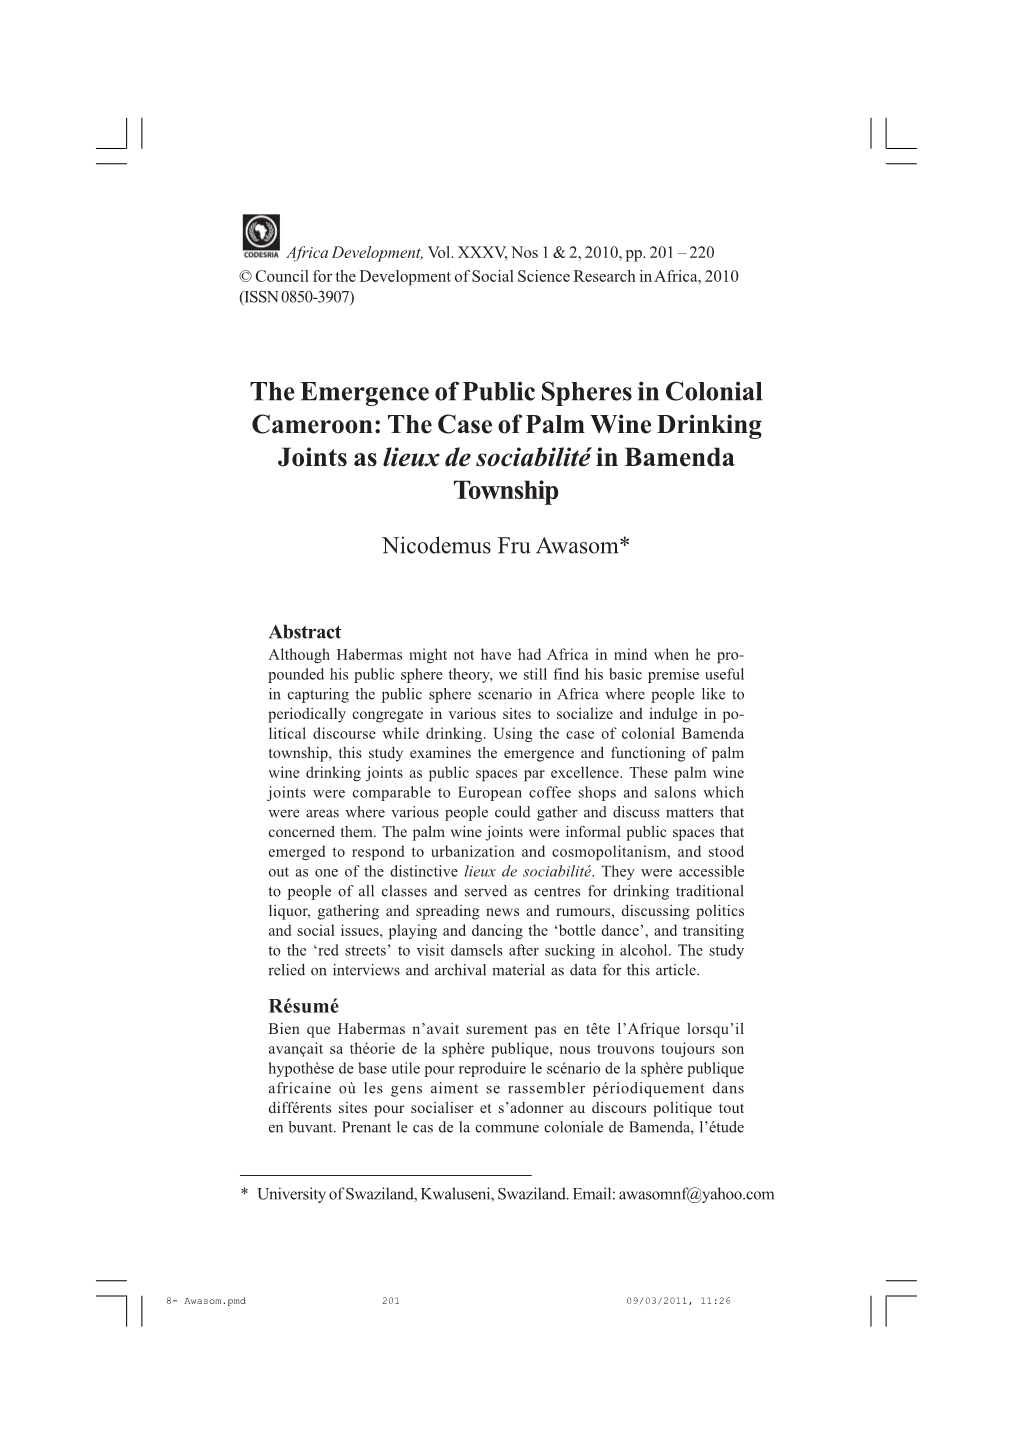 The Emergence of Public Spheres in Colonial Cameroon: the Case of Palm Wine Drinking Joints As Lieux De Sociabilité in Bamenda Township